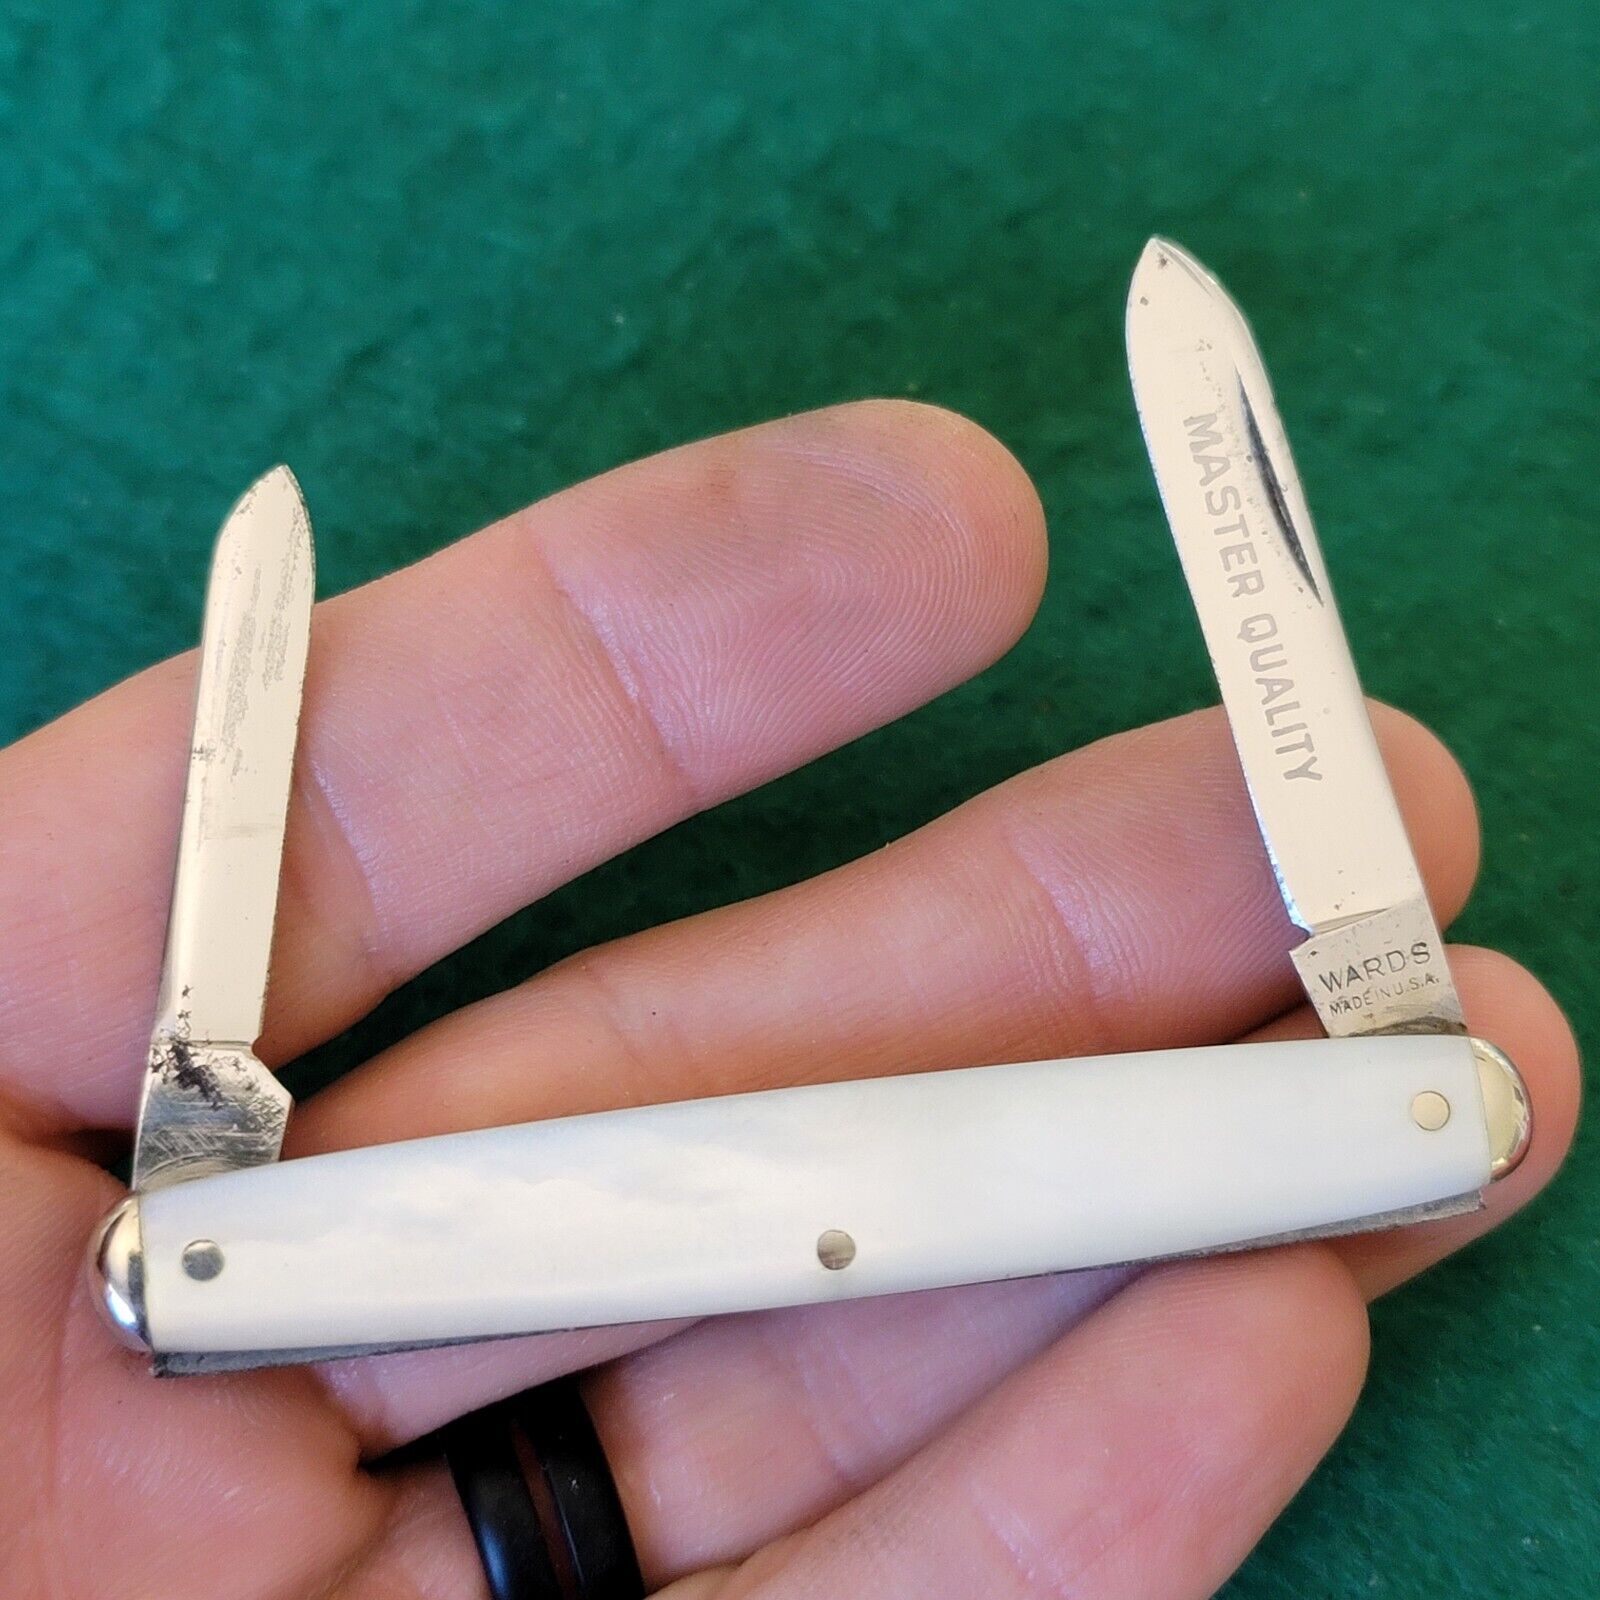 Minty Old Vintage Wards Winchester Pearl Pen Fob Pocket Knife With Etch